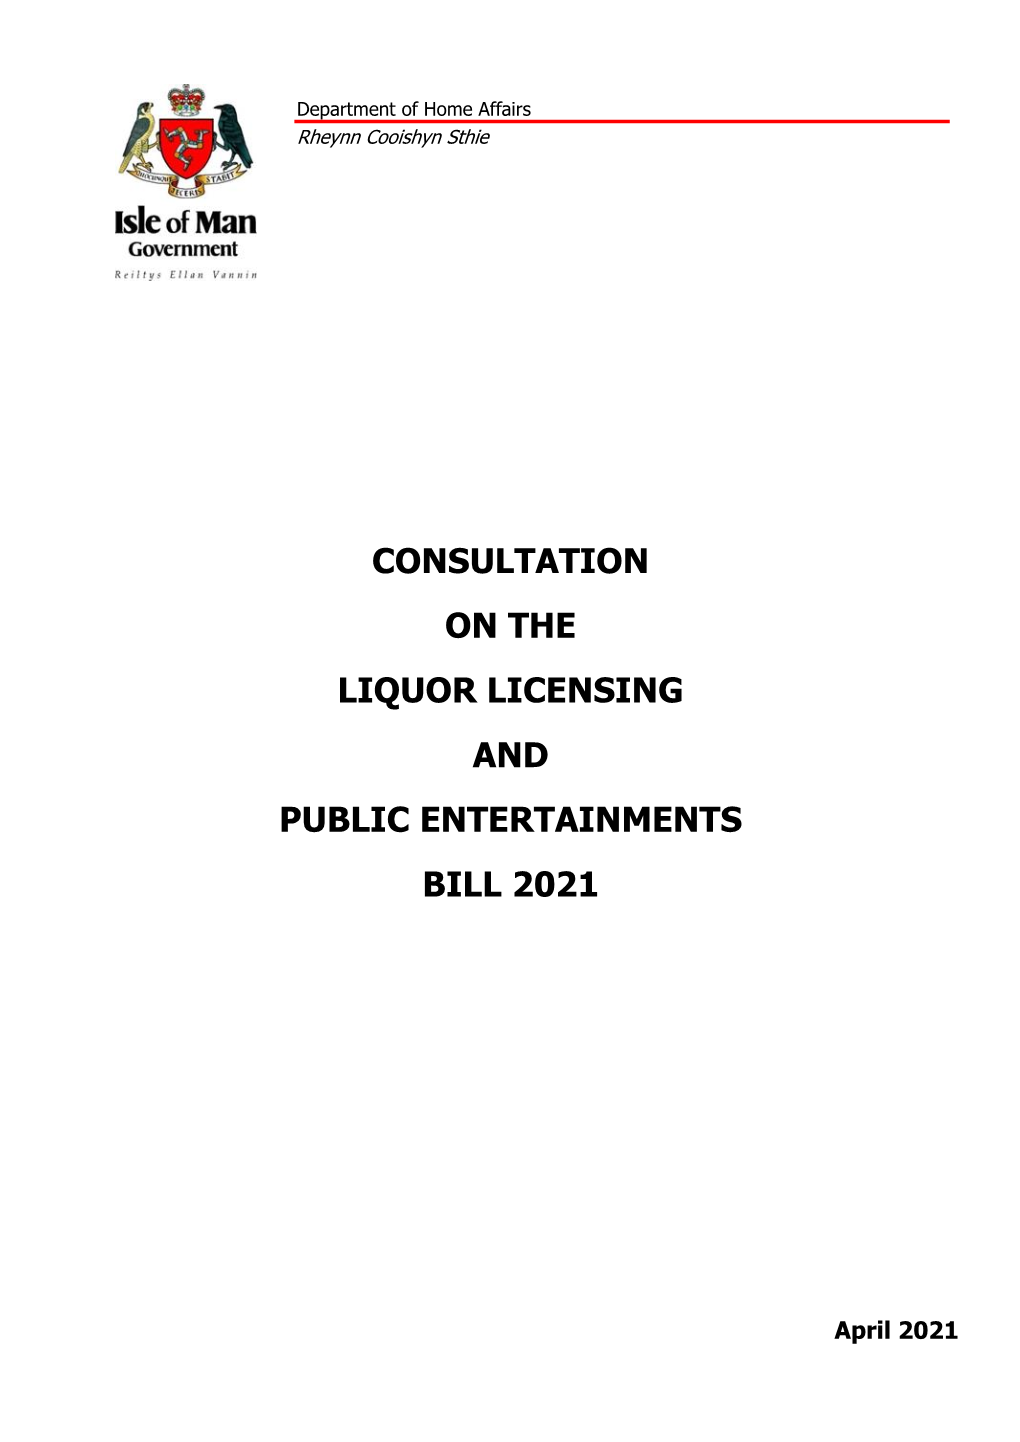 Consultation on the Liquor Licensing and Public Entertainments Bill 2021